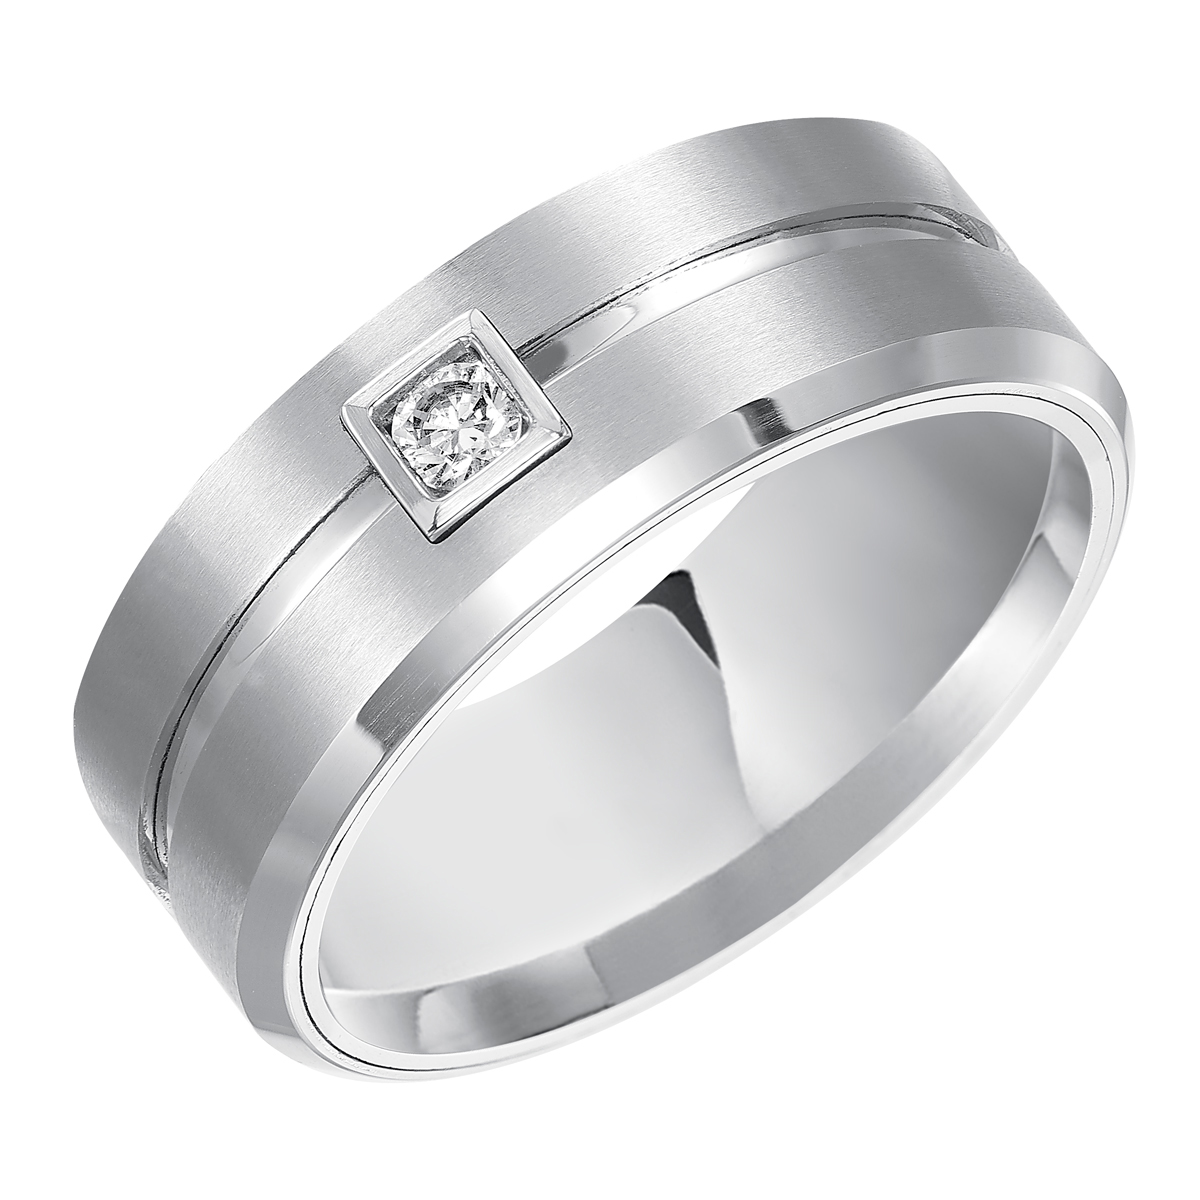 White Tungsten Beveled & Grooved Wedding Band with Diamond Inlay, Size ...